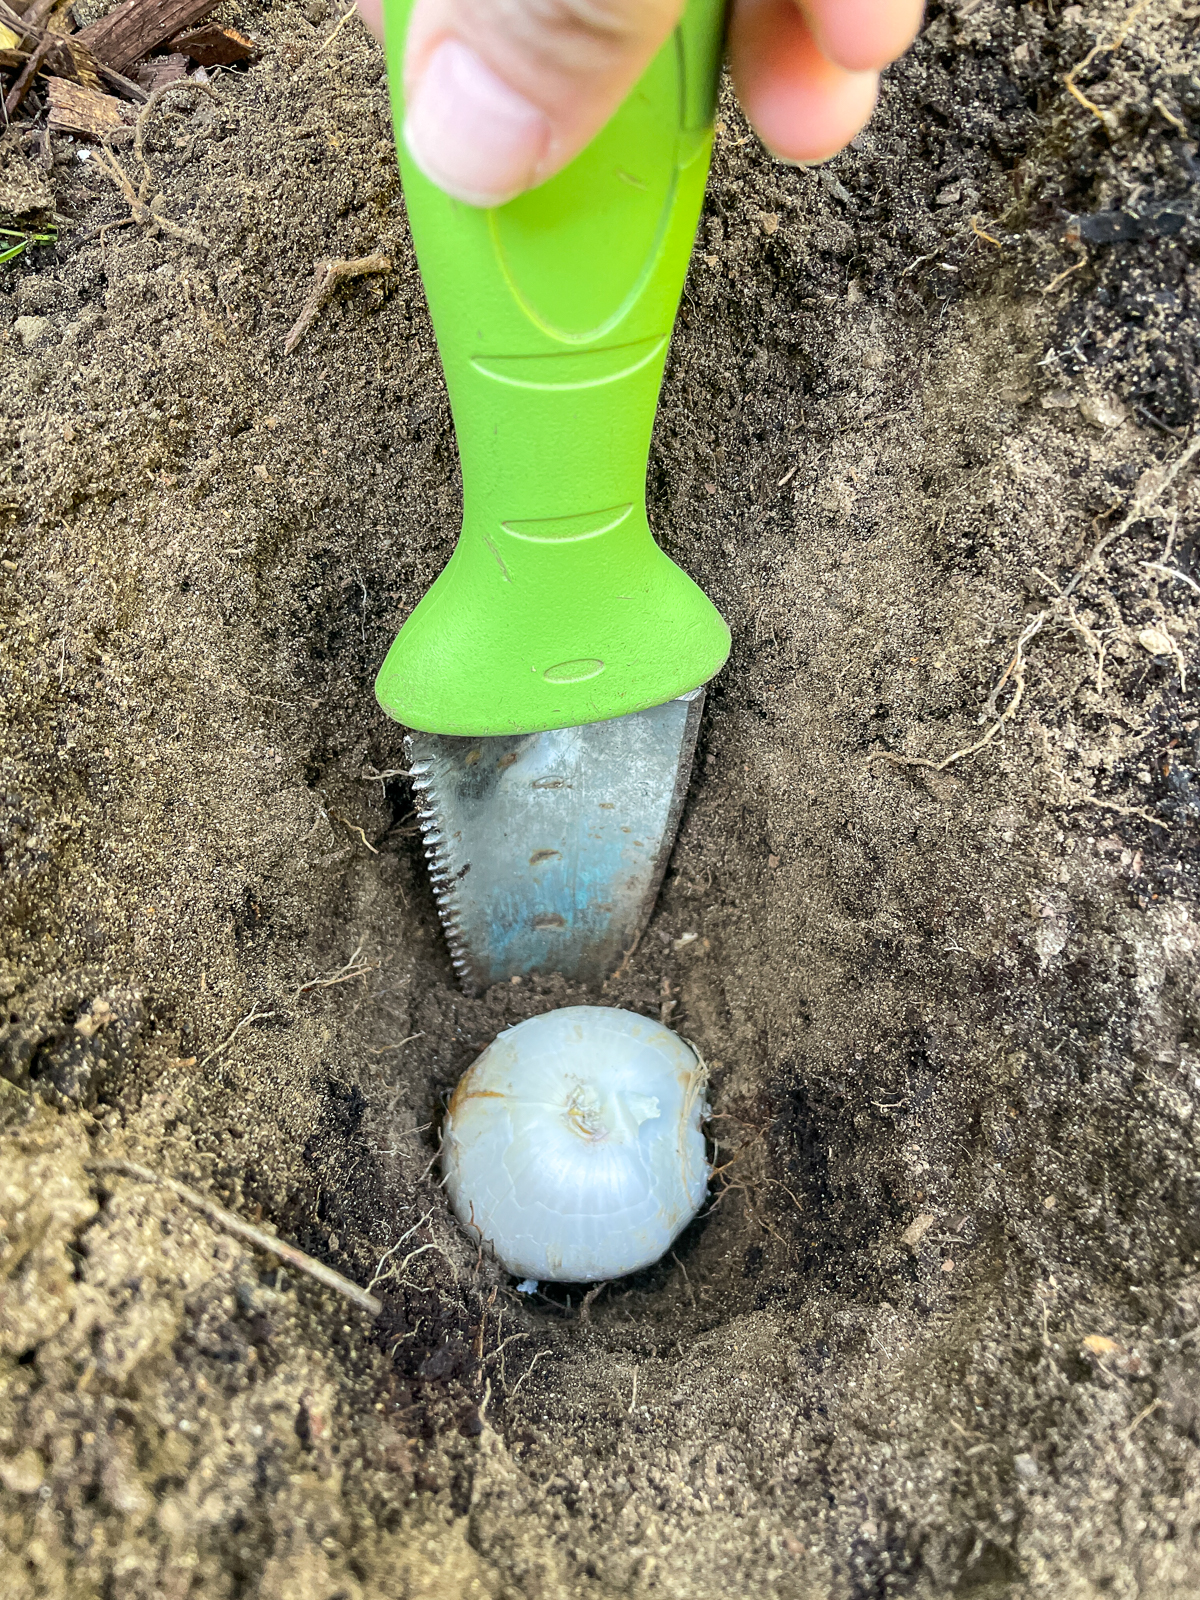 gauging depth of hole for allium bulb with a hand shovel